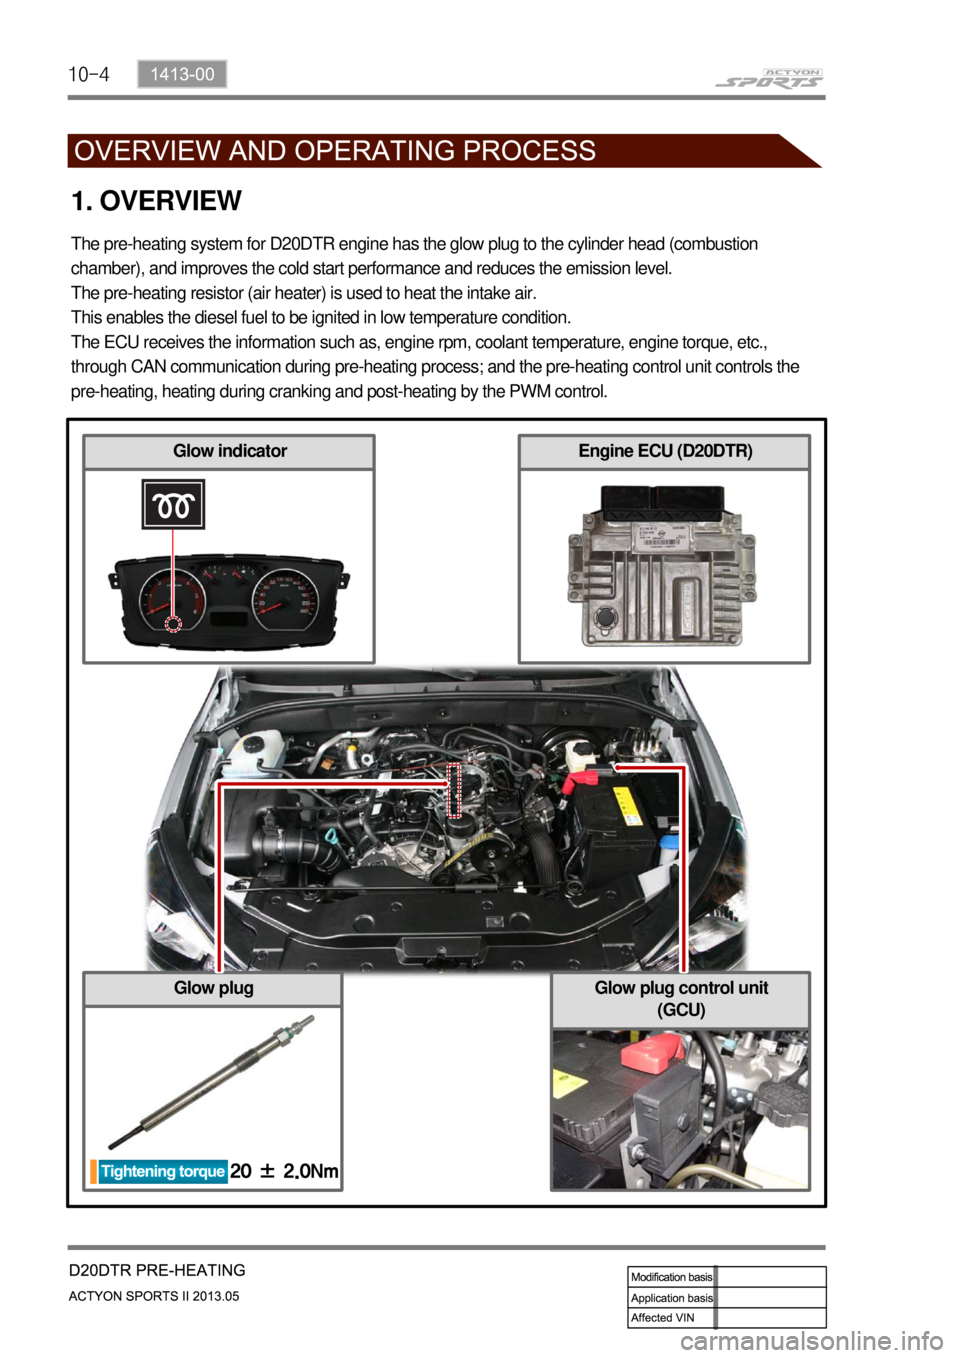 SSANGYONG NEW ACTYON SPORTS 2013 Owners Guide 10-4
Glow plug control unit 
(GCU)
1. OVERVIEW
The pre-heating system for D20DTR engine has the glow plug to the cylinder head (combustion 
chamber), and improves the cold start performance and reduce